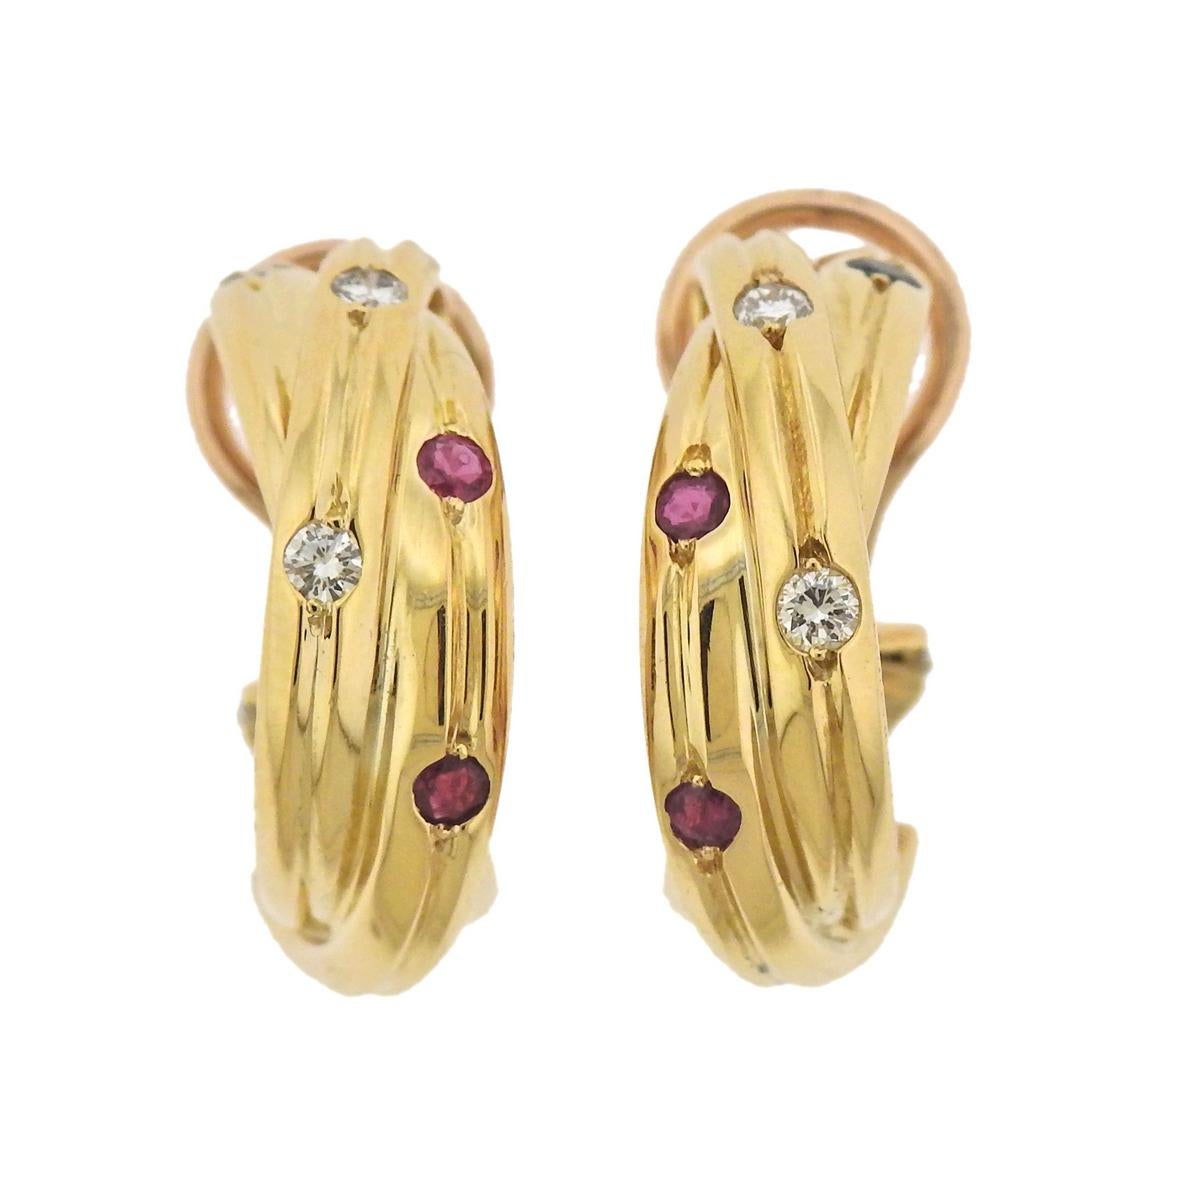  18k yellow gold Trinity hoop earrings, crafted by Cartier, decorated with sapphires, rubies and approx. 0.12ctw in G/VS diamonds. Earrings are 21mm x 6.5mm, weigh 13 grams. Marked: Cartier, 750 B22 944.